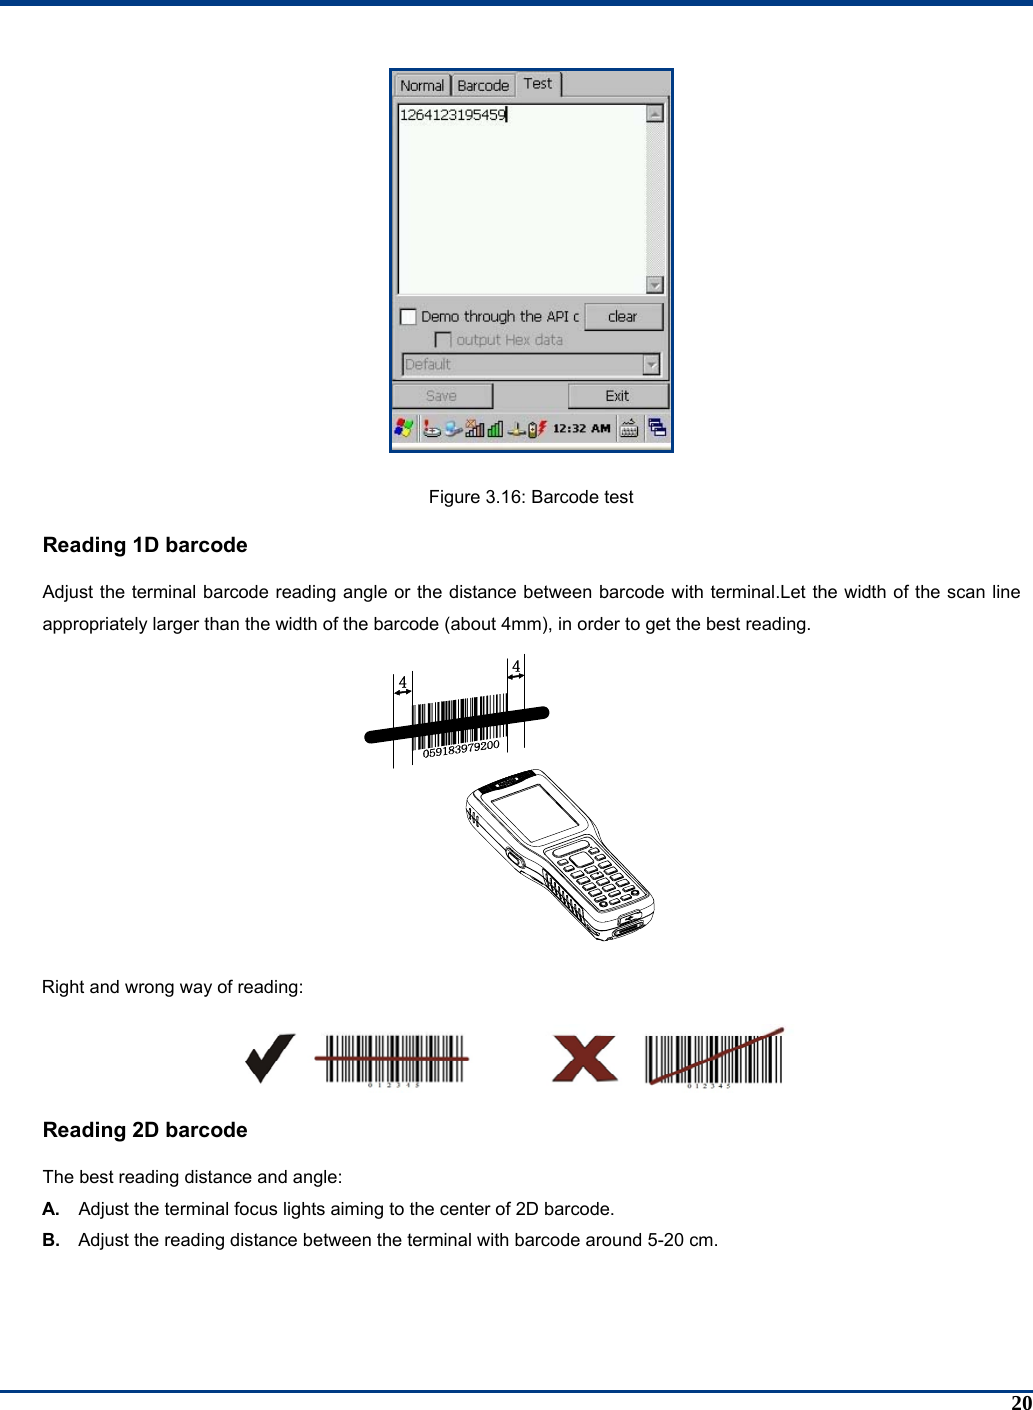 20  Figure 3.16: Barcode test Reading 1D barcode Adjust the terminal barcode reading angle or the distance between barcode with terminal.Let the width of the scan line appropriately larger than the width of the barcode (about 4mm), in order to get the best reading.  Right and wrong way of reading:   Reading 2D barcode The best reading distance and angle:   A.  Adjust the terminal focus lights aiming to the center of 2D barcode. B.  Adjust the reading distance between the terminal with barcode around 5-20 cm. 